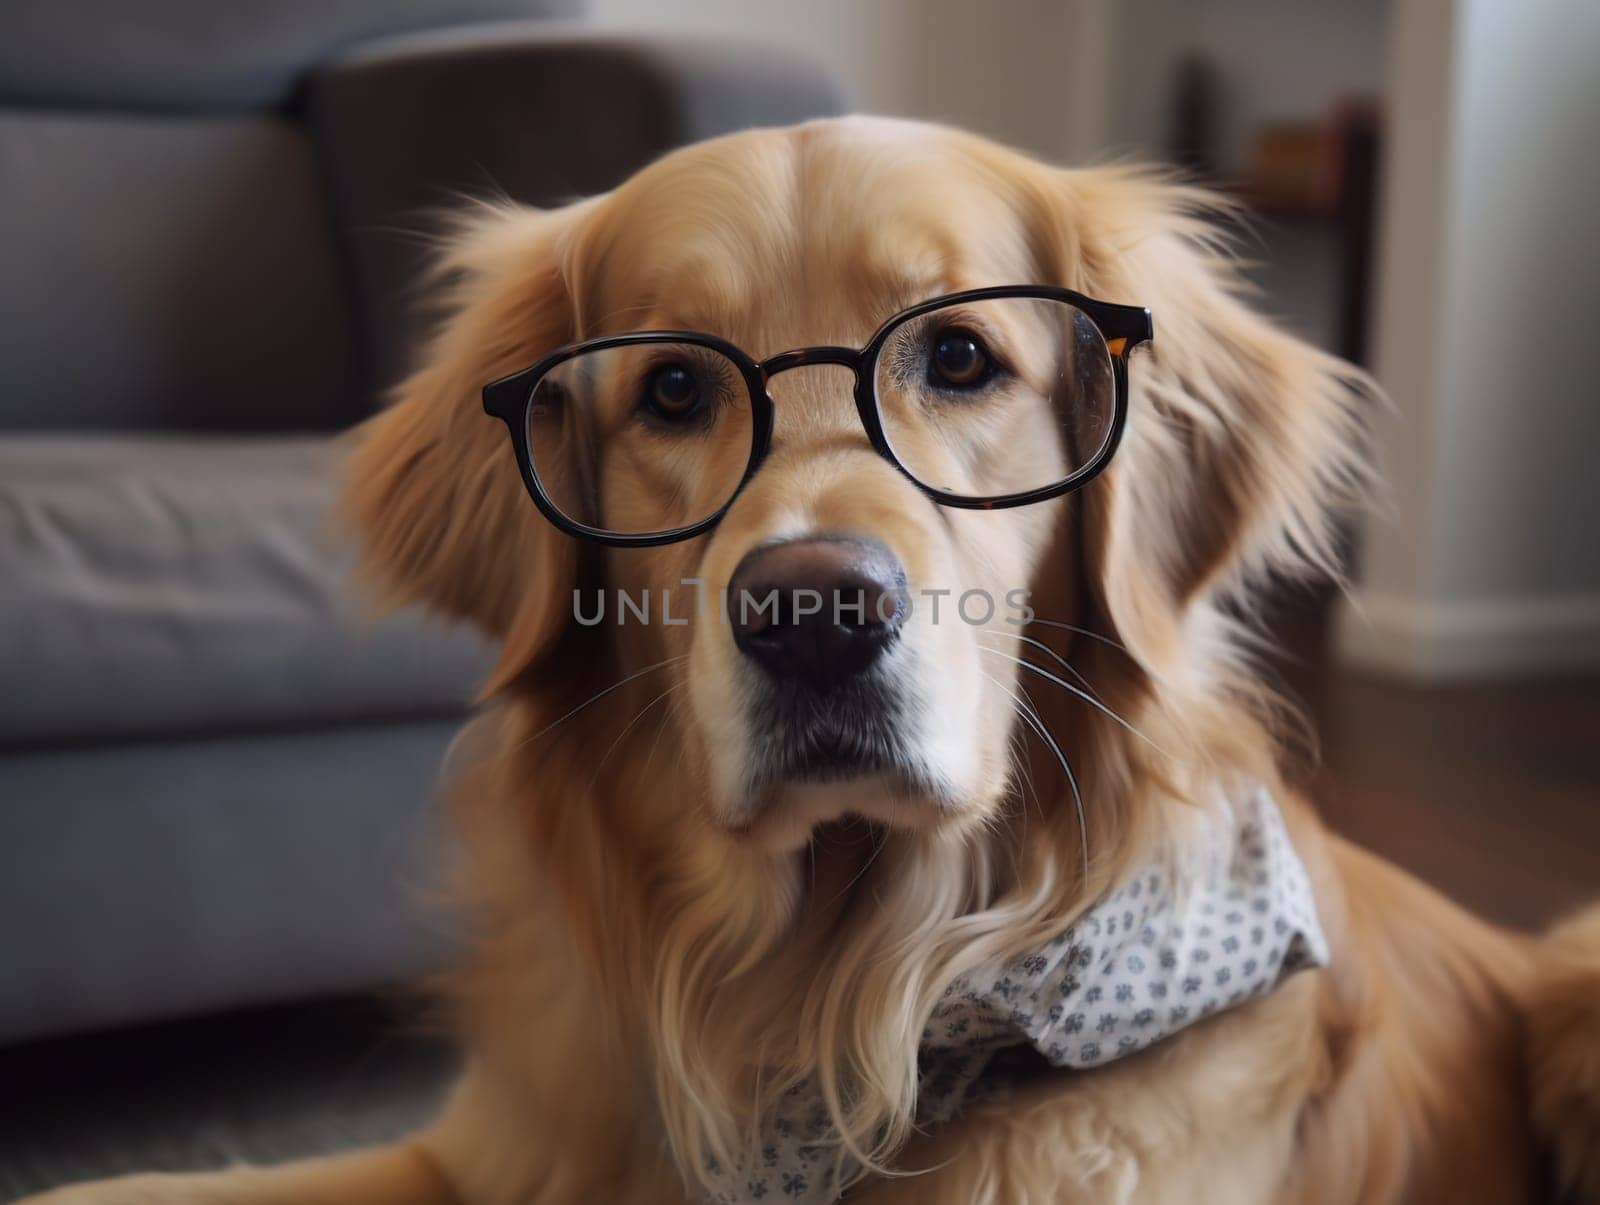 Golden Retriever Breed, A Smart Dog In Glasses, Looking At The Camera